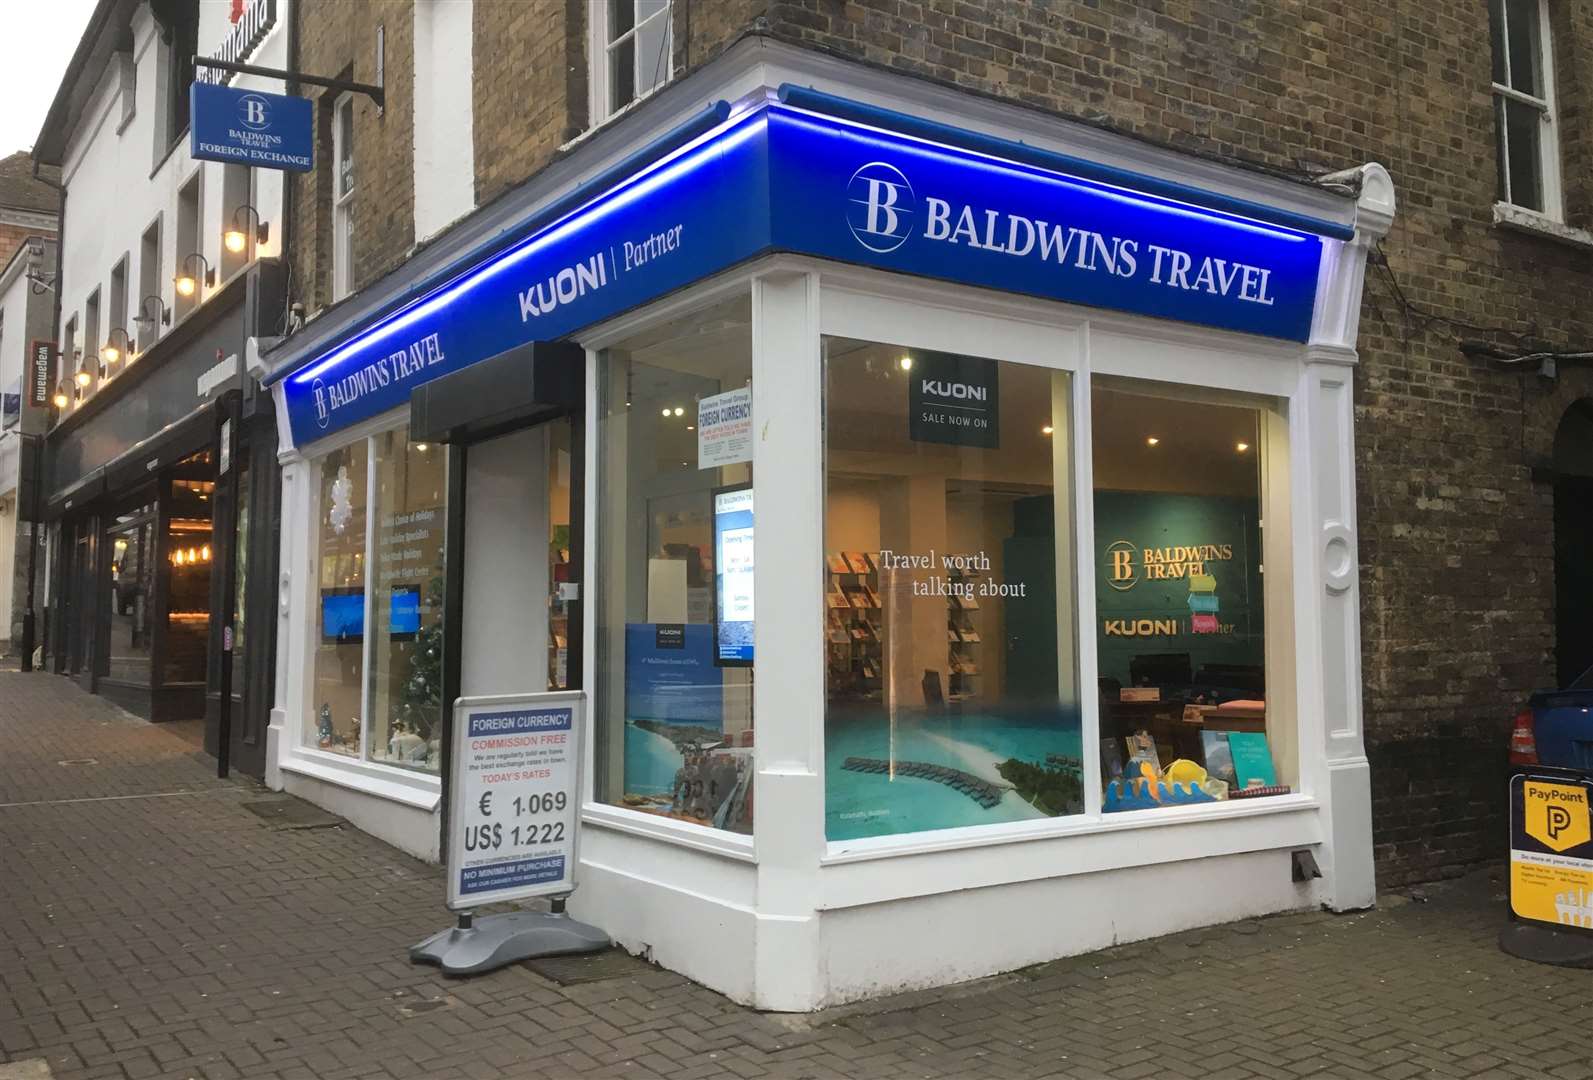 Baldwins Travel has stores around Kent and Sussex